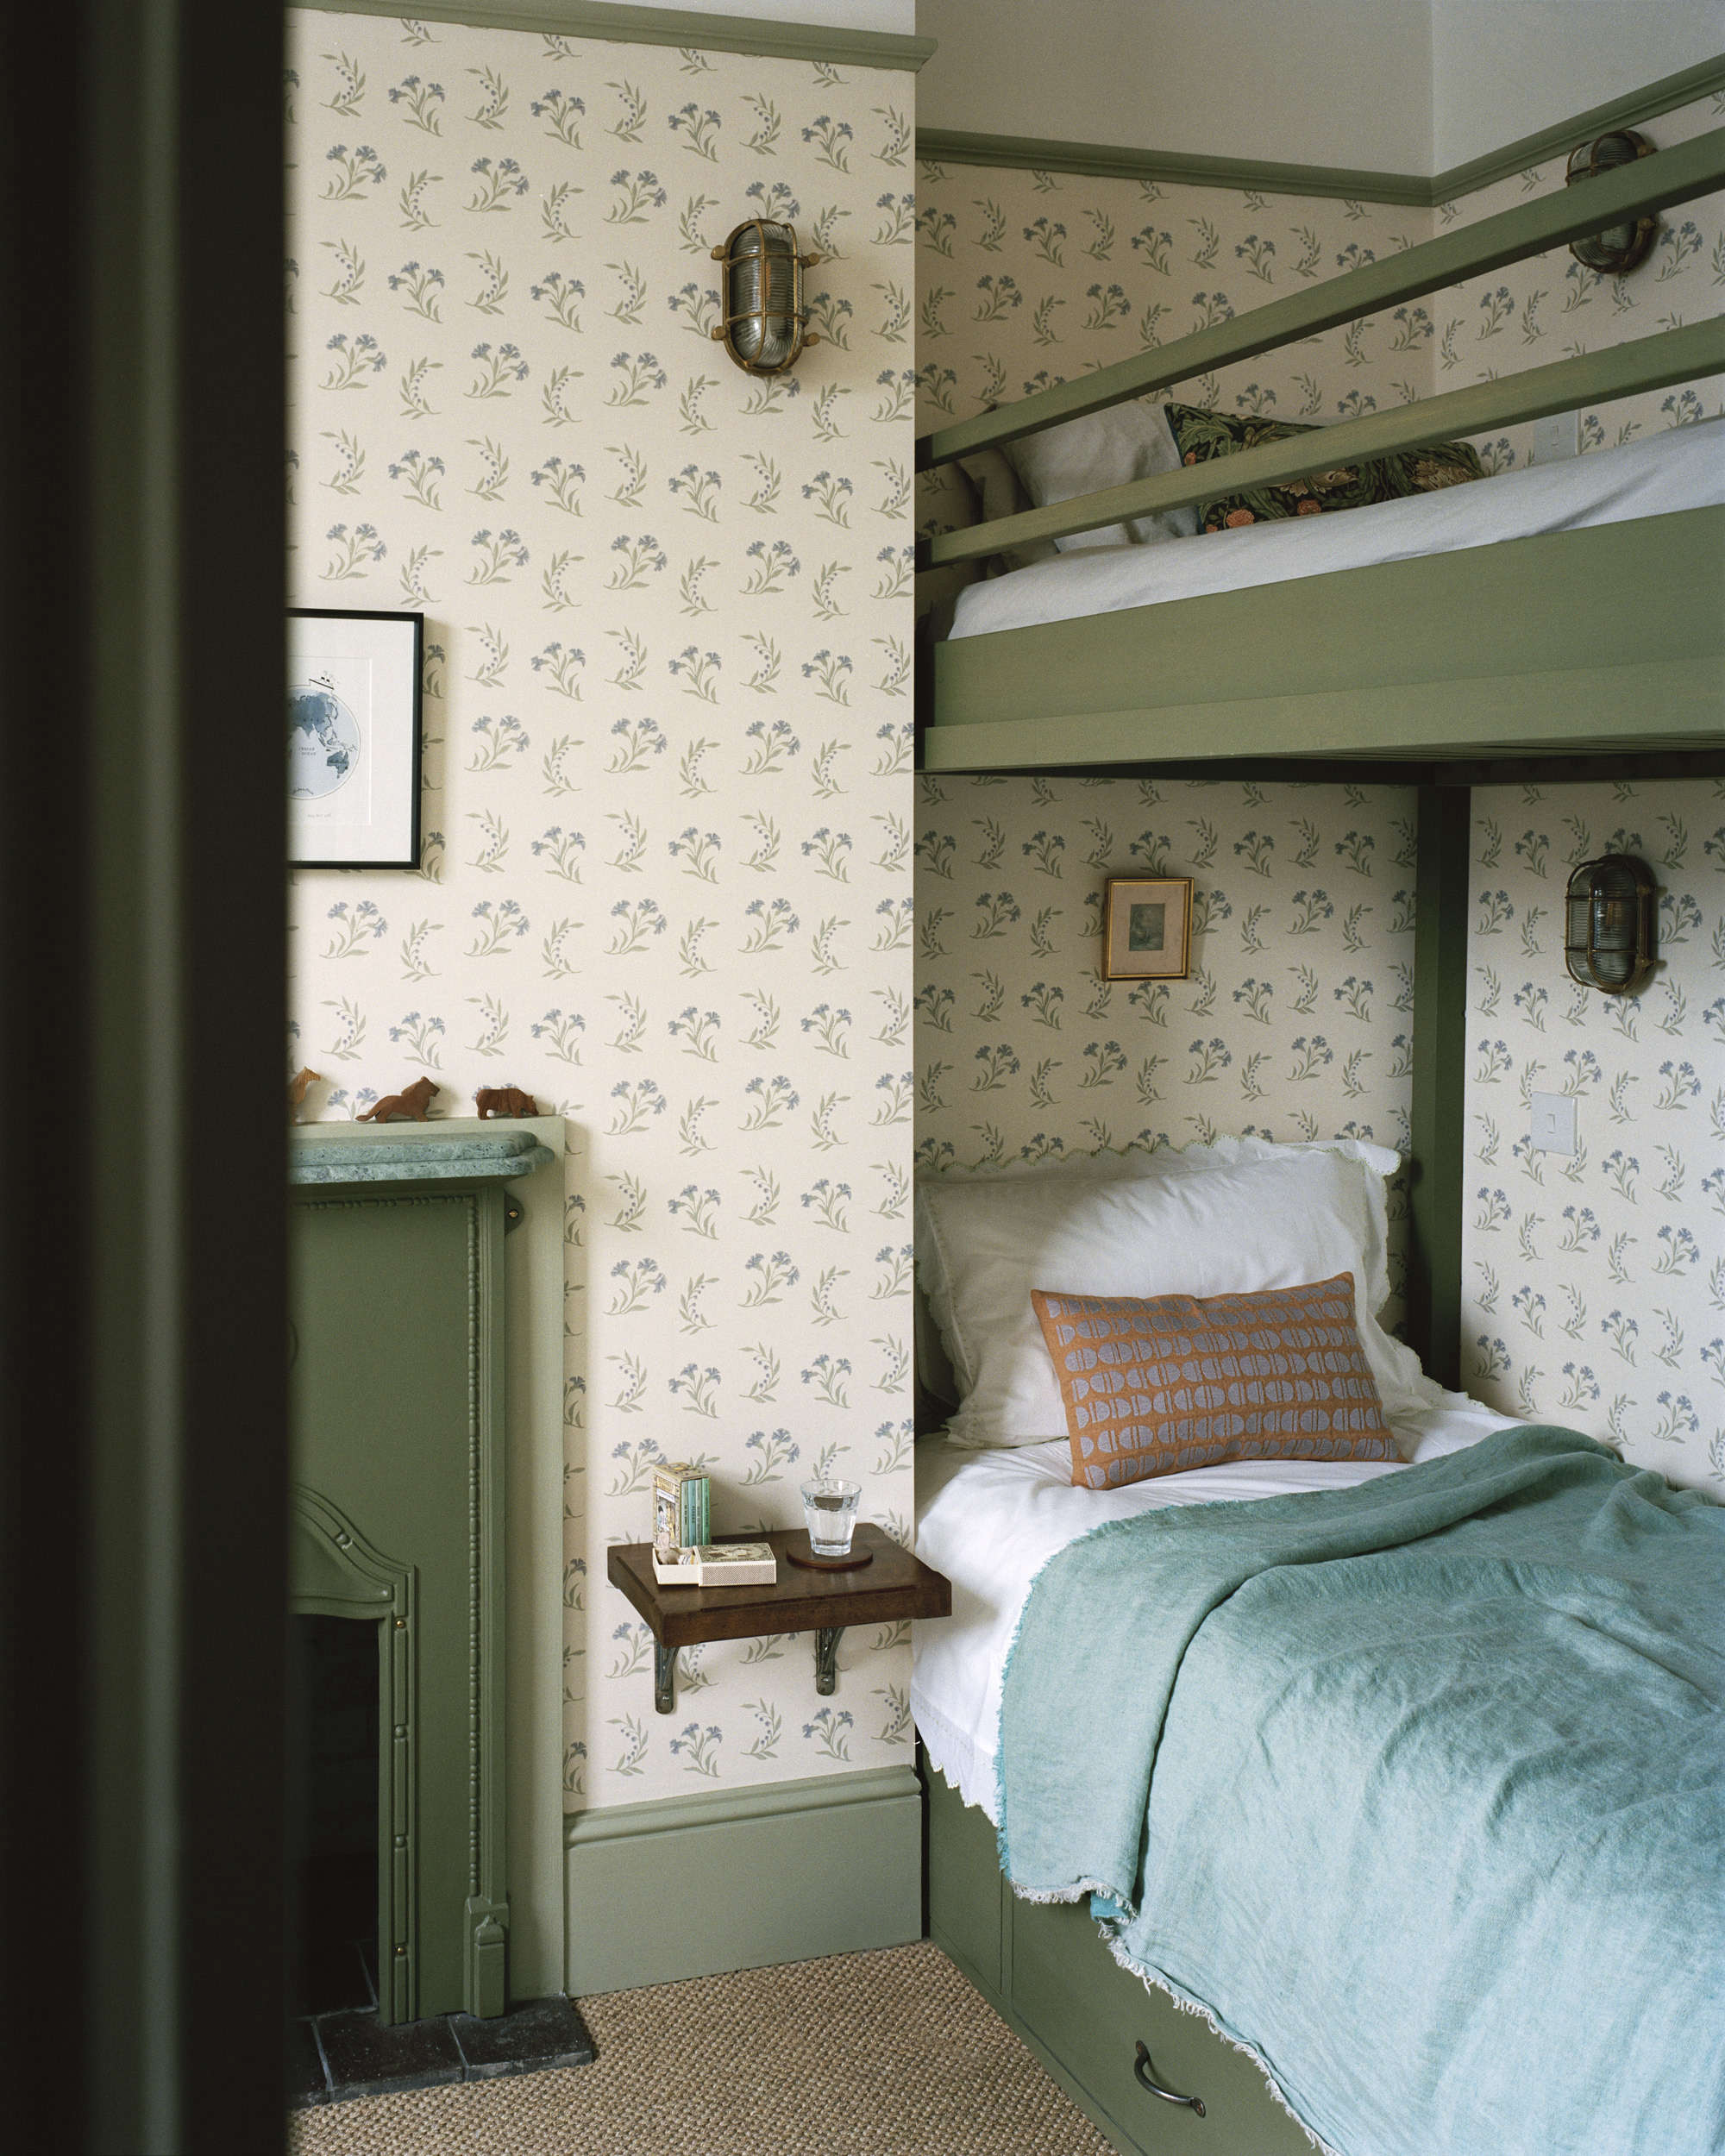 You are currently viewing Steal This Look: Une chambre avec lits Superposés de style Cottage à Highgate, Londres